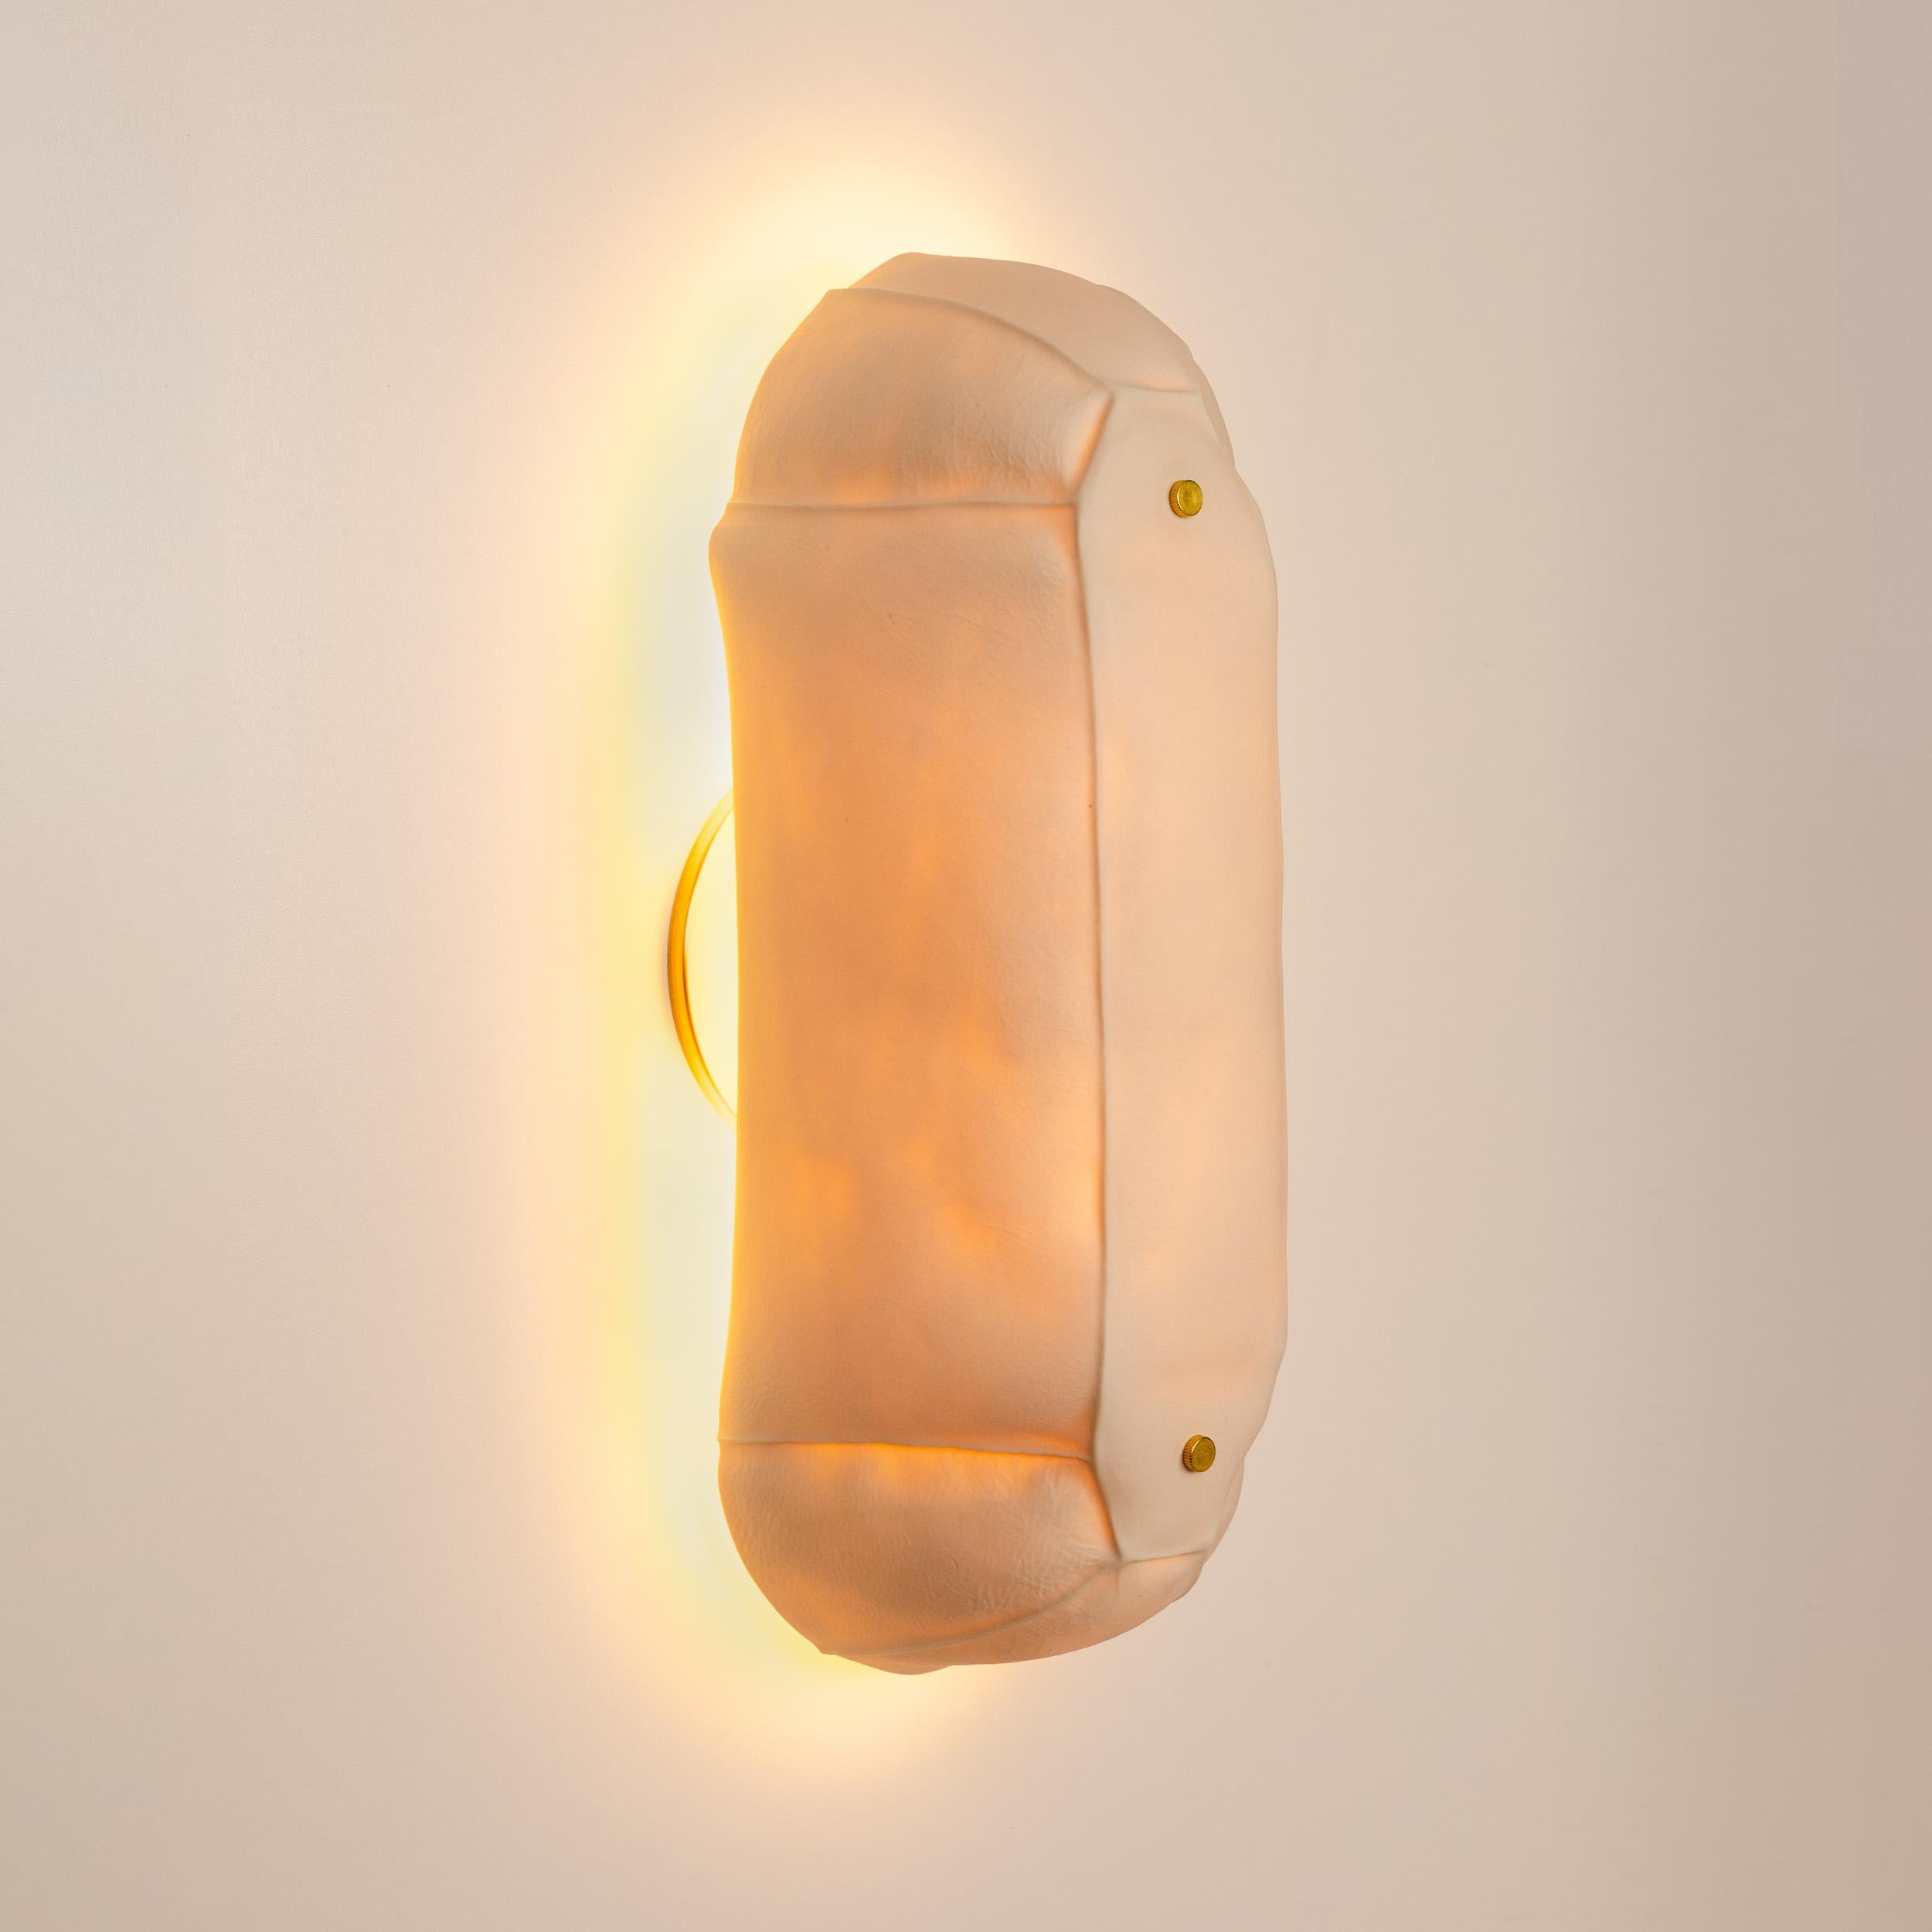 Tactile and textured porcelain wall sconce light in a bulbous racetrack shape. The translucent porcelain diffuser casts a warm-colored glow when lit. 

Shown in the photos with a waxed brass canopy and hardware. Custom metal finishes are available